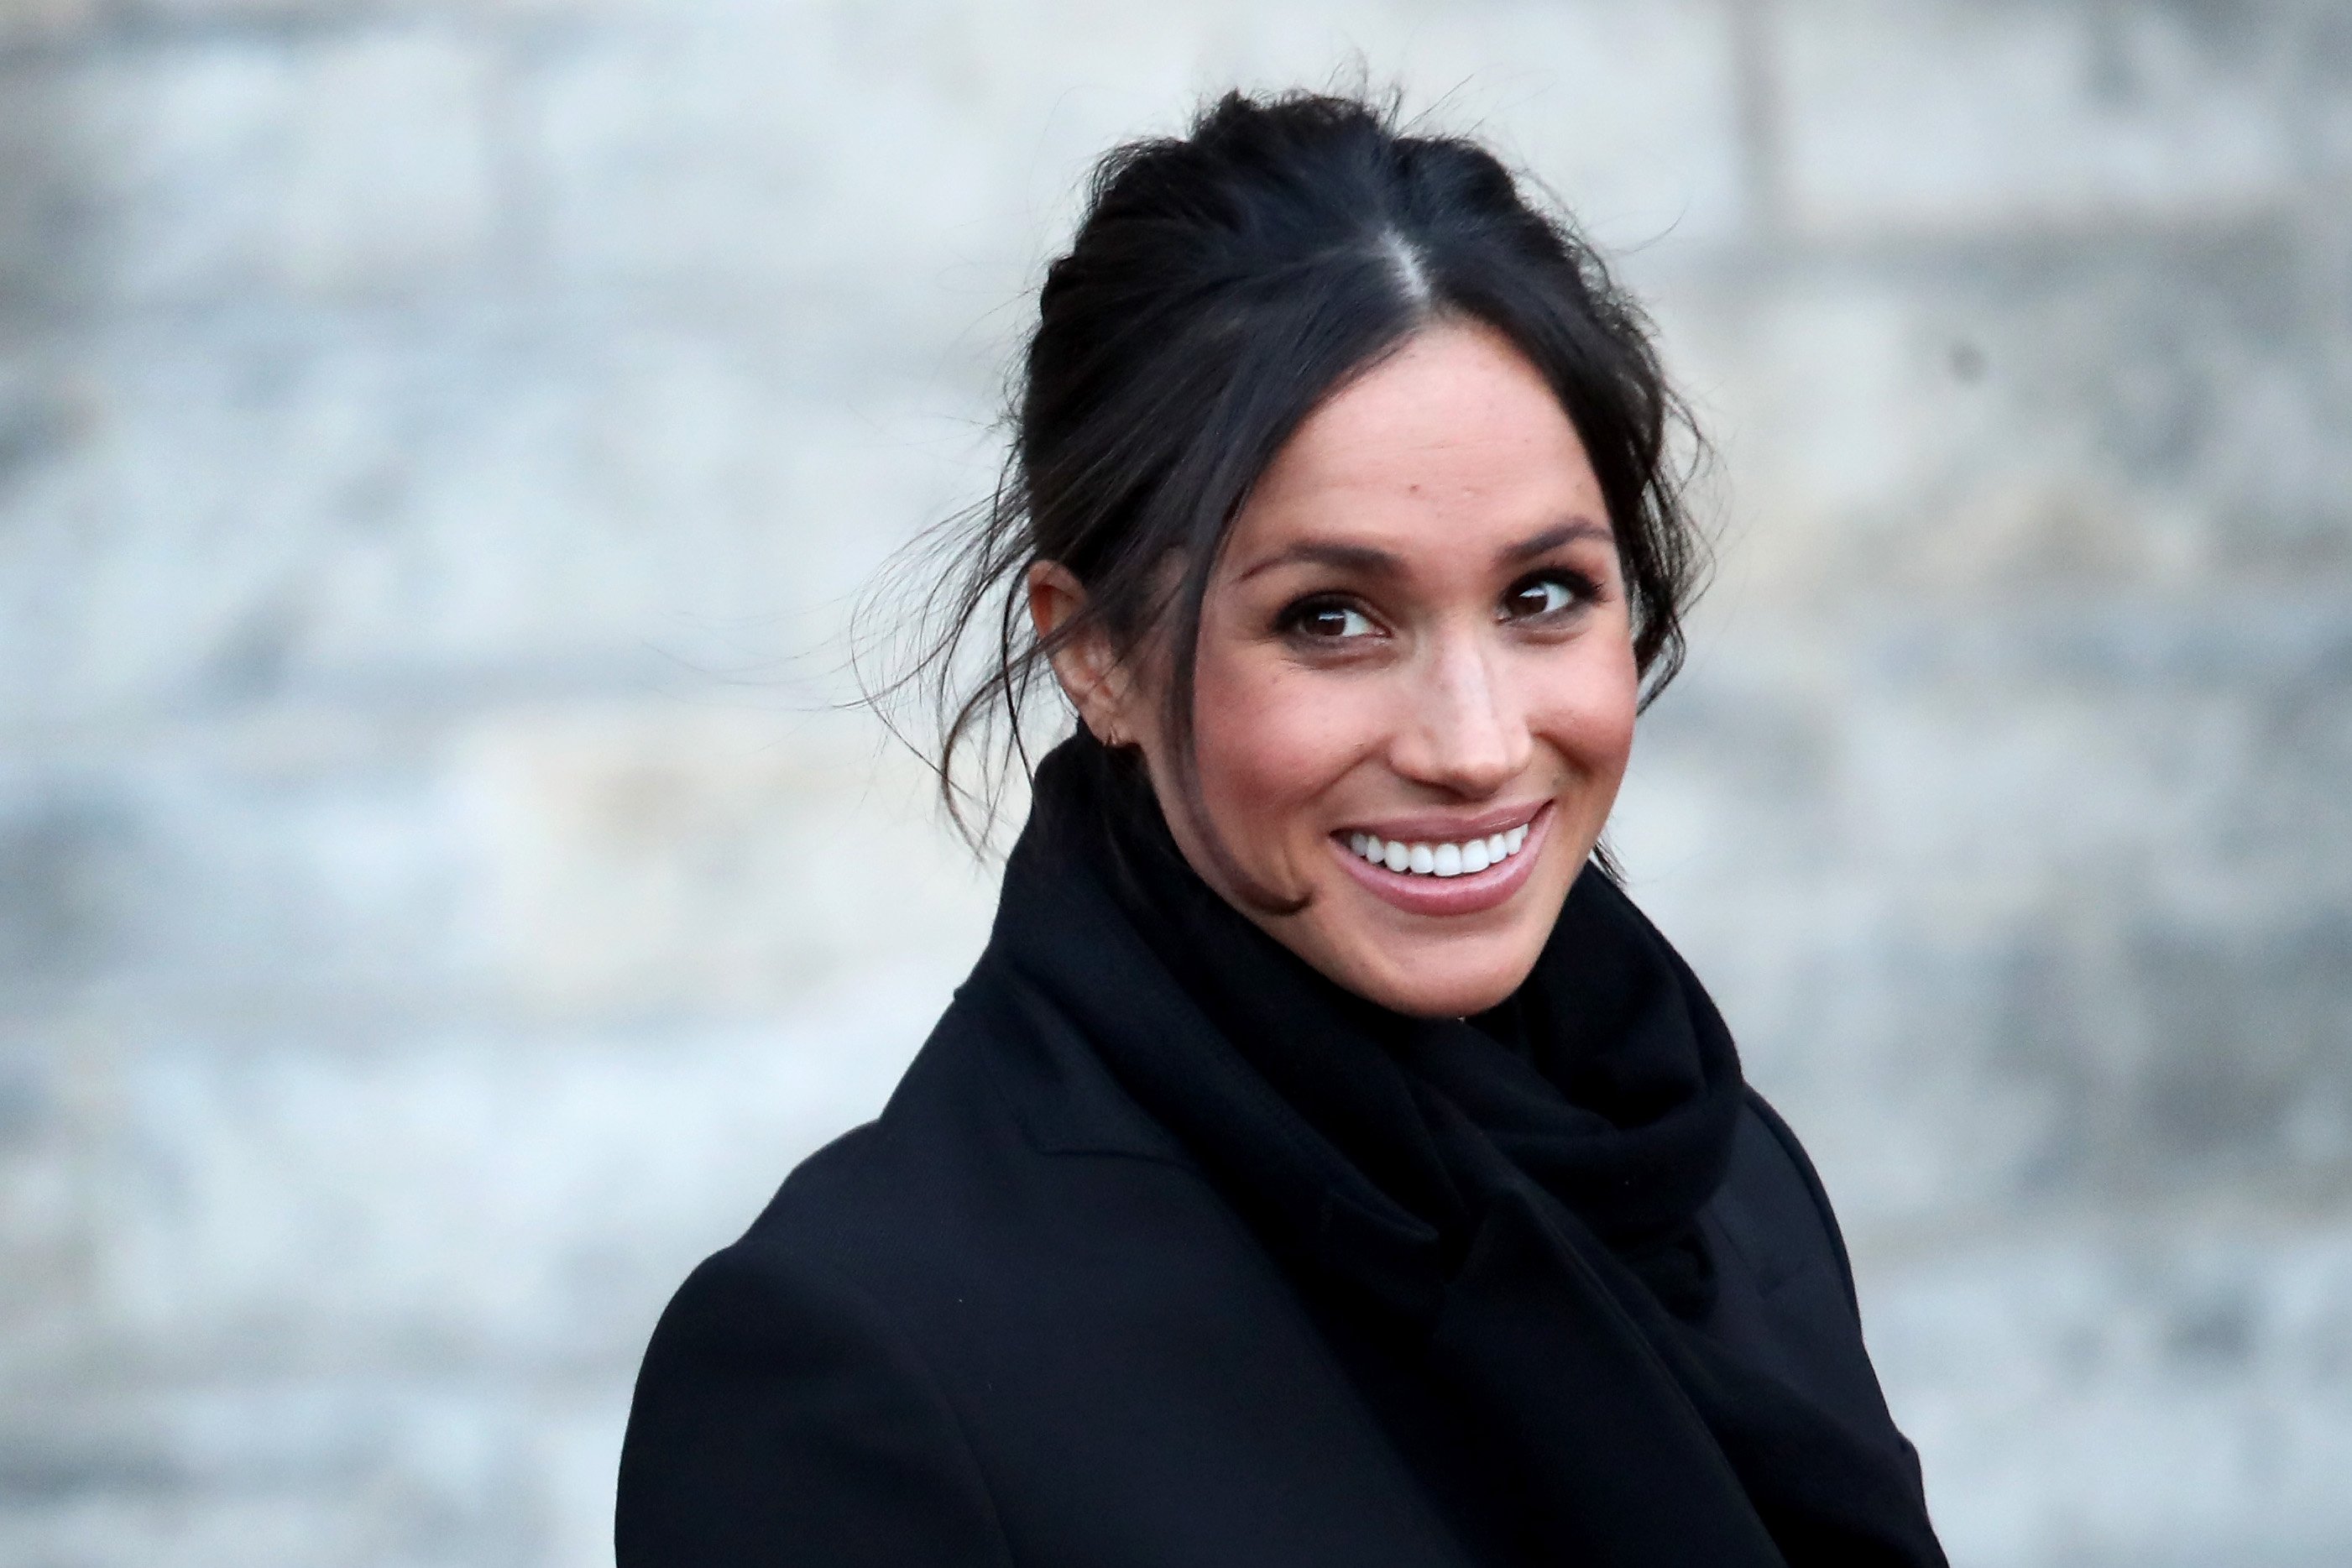 Meghan Markle departs from a walkabout at Cardiff Castle on January 18, 2018 in Cardiff, Wales | Photo: Getty Images